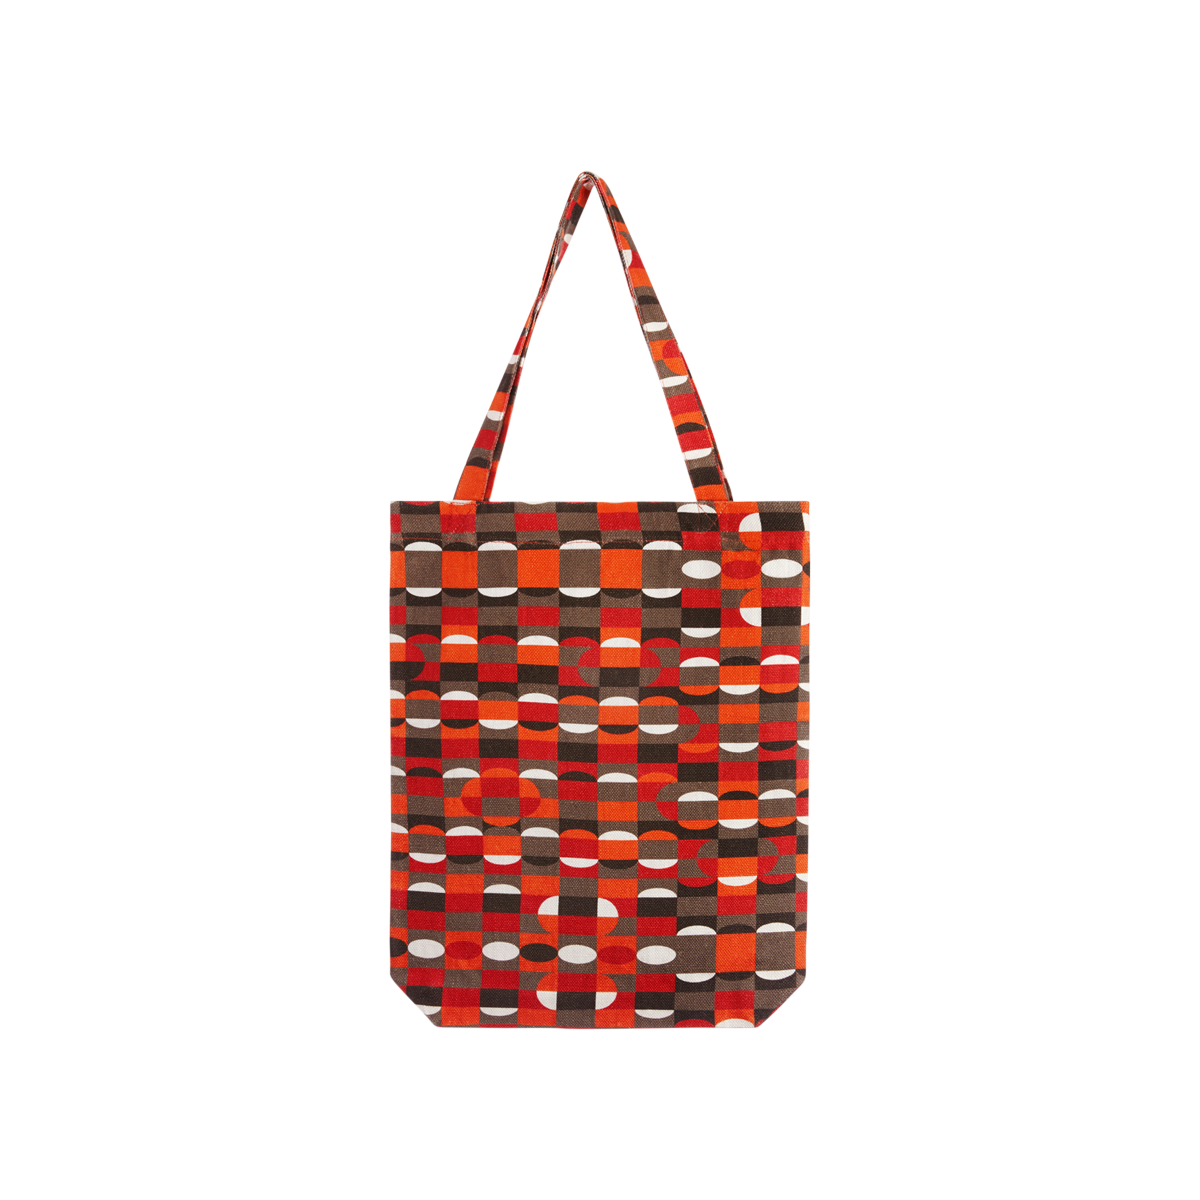 Diptyque - Flax Tote Bag Model 2